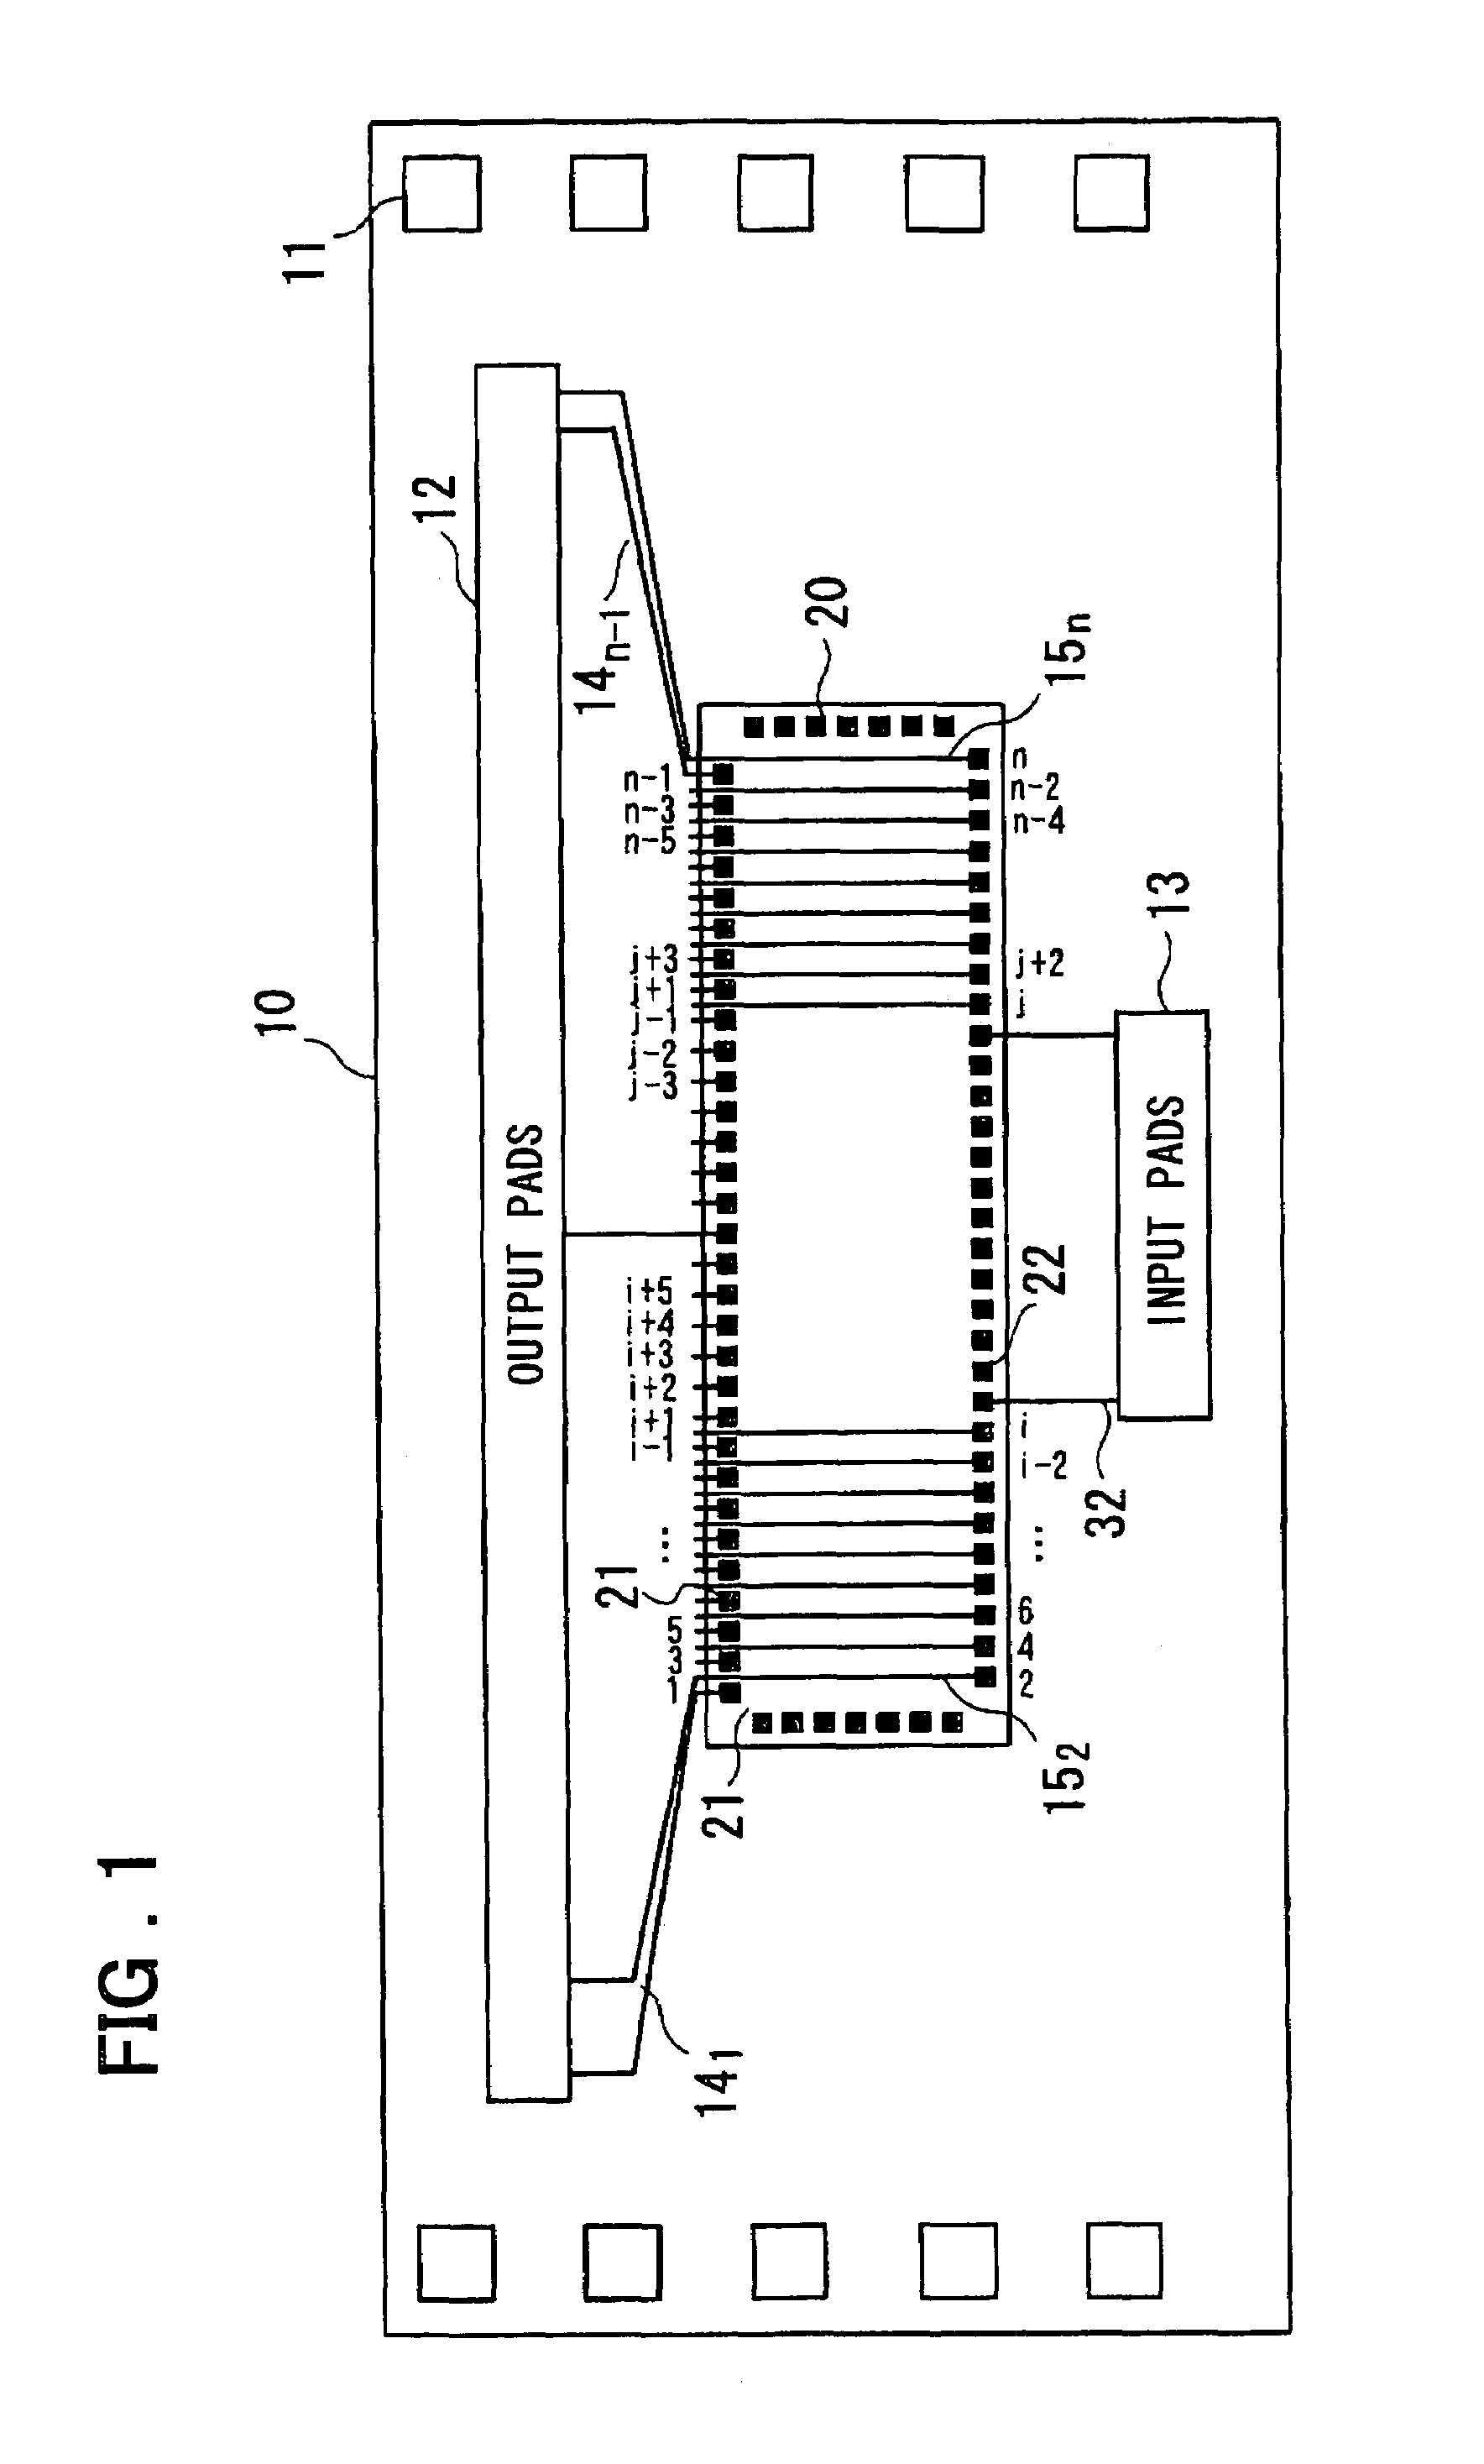 Semiconductor chip mounting arrangement